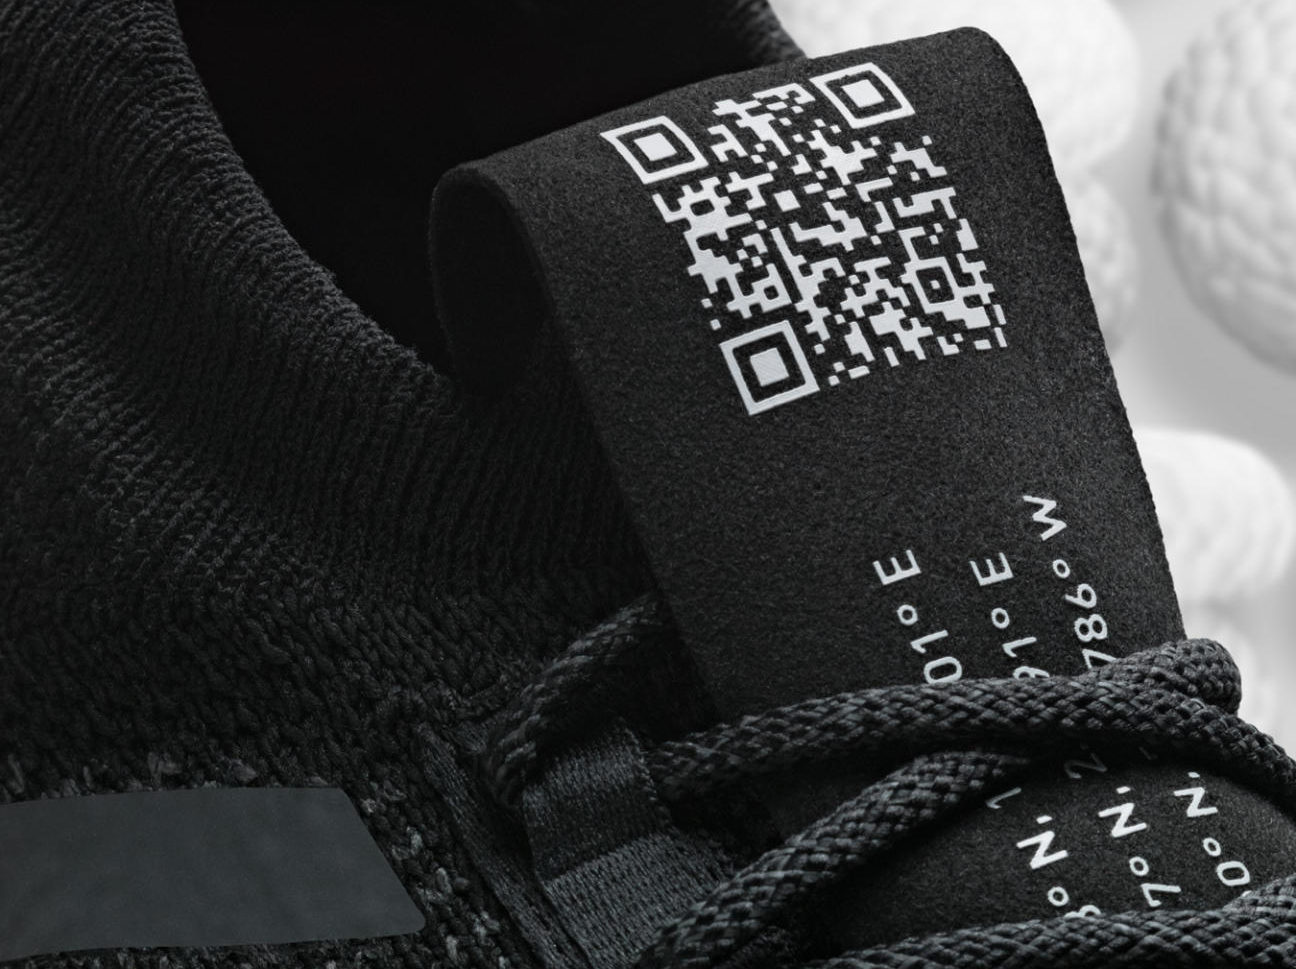 adidas shoes with qr code